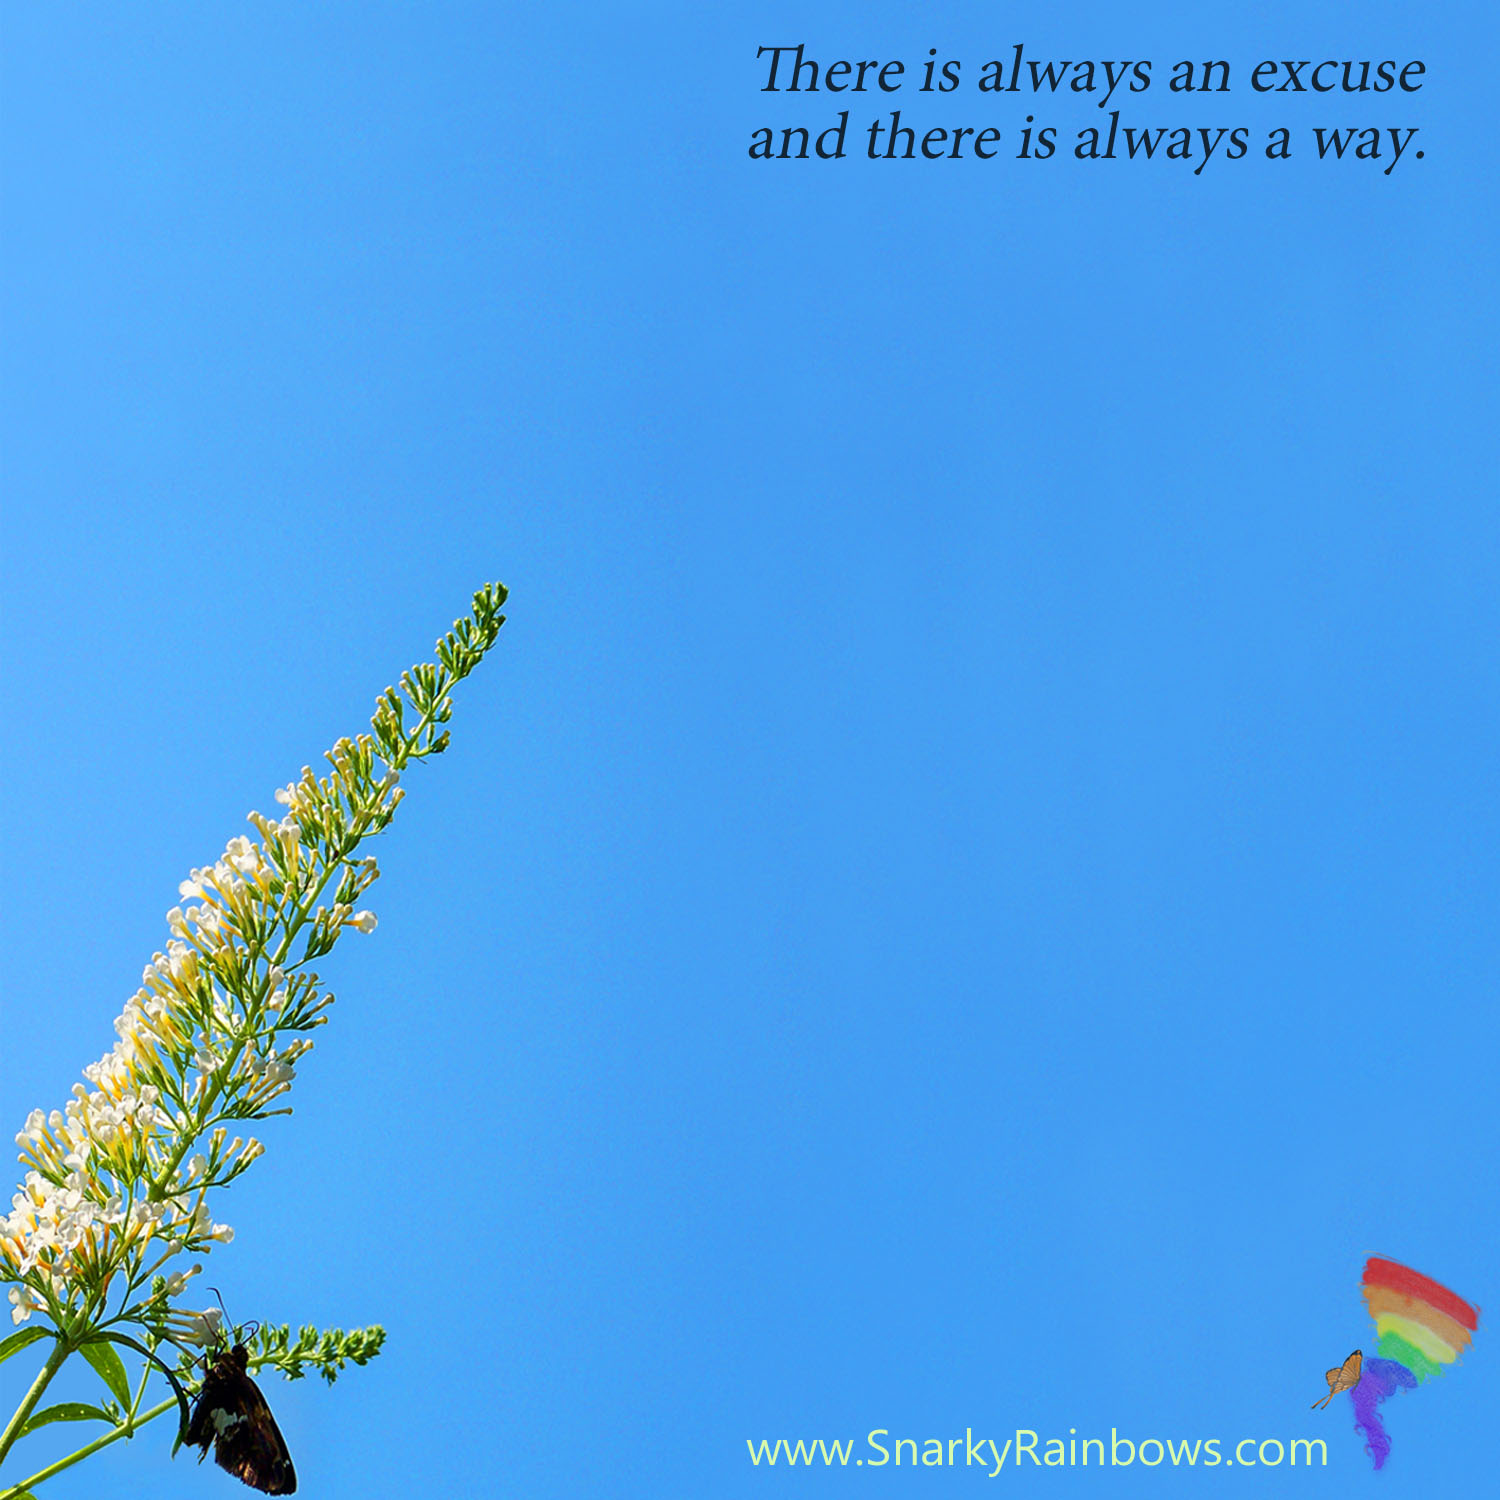 Quote of the Day - excuse or way